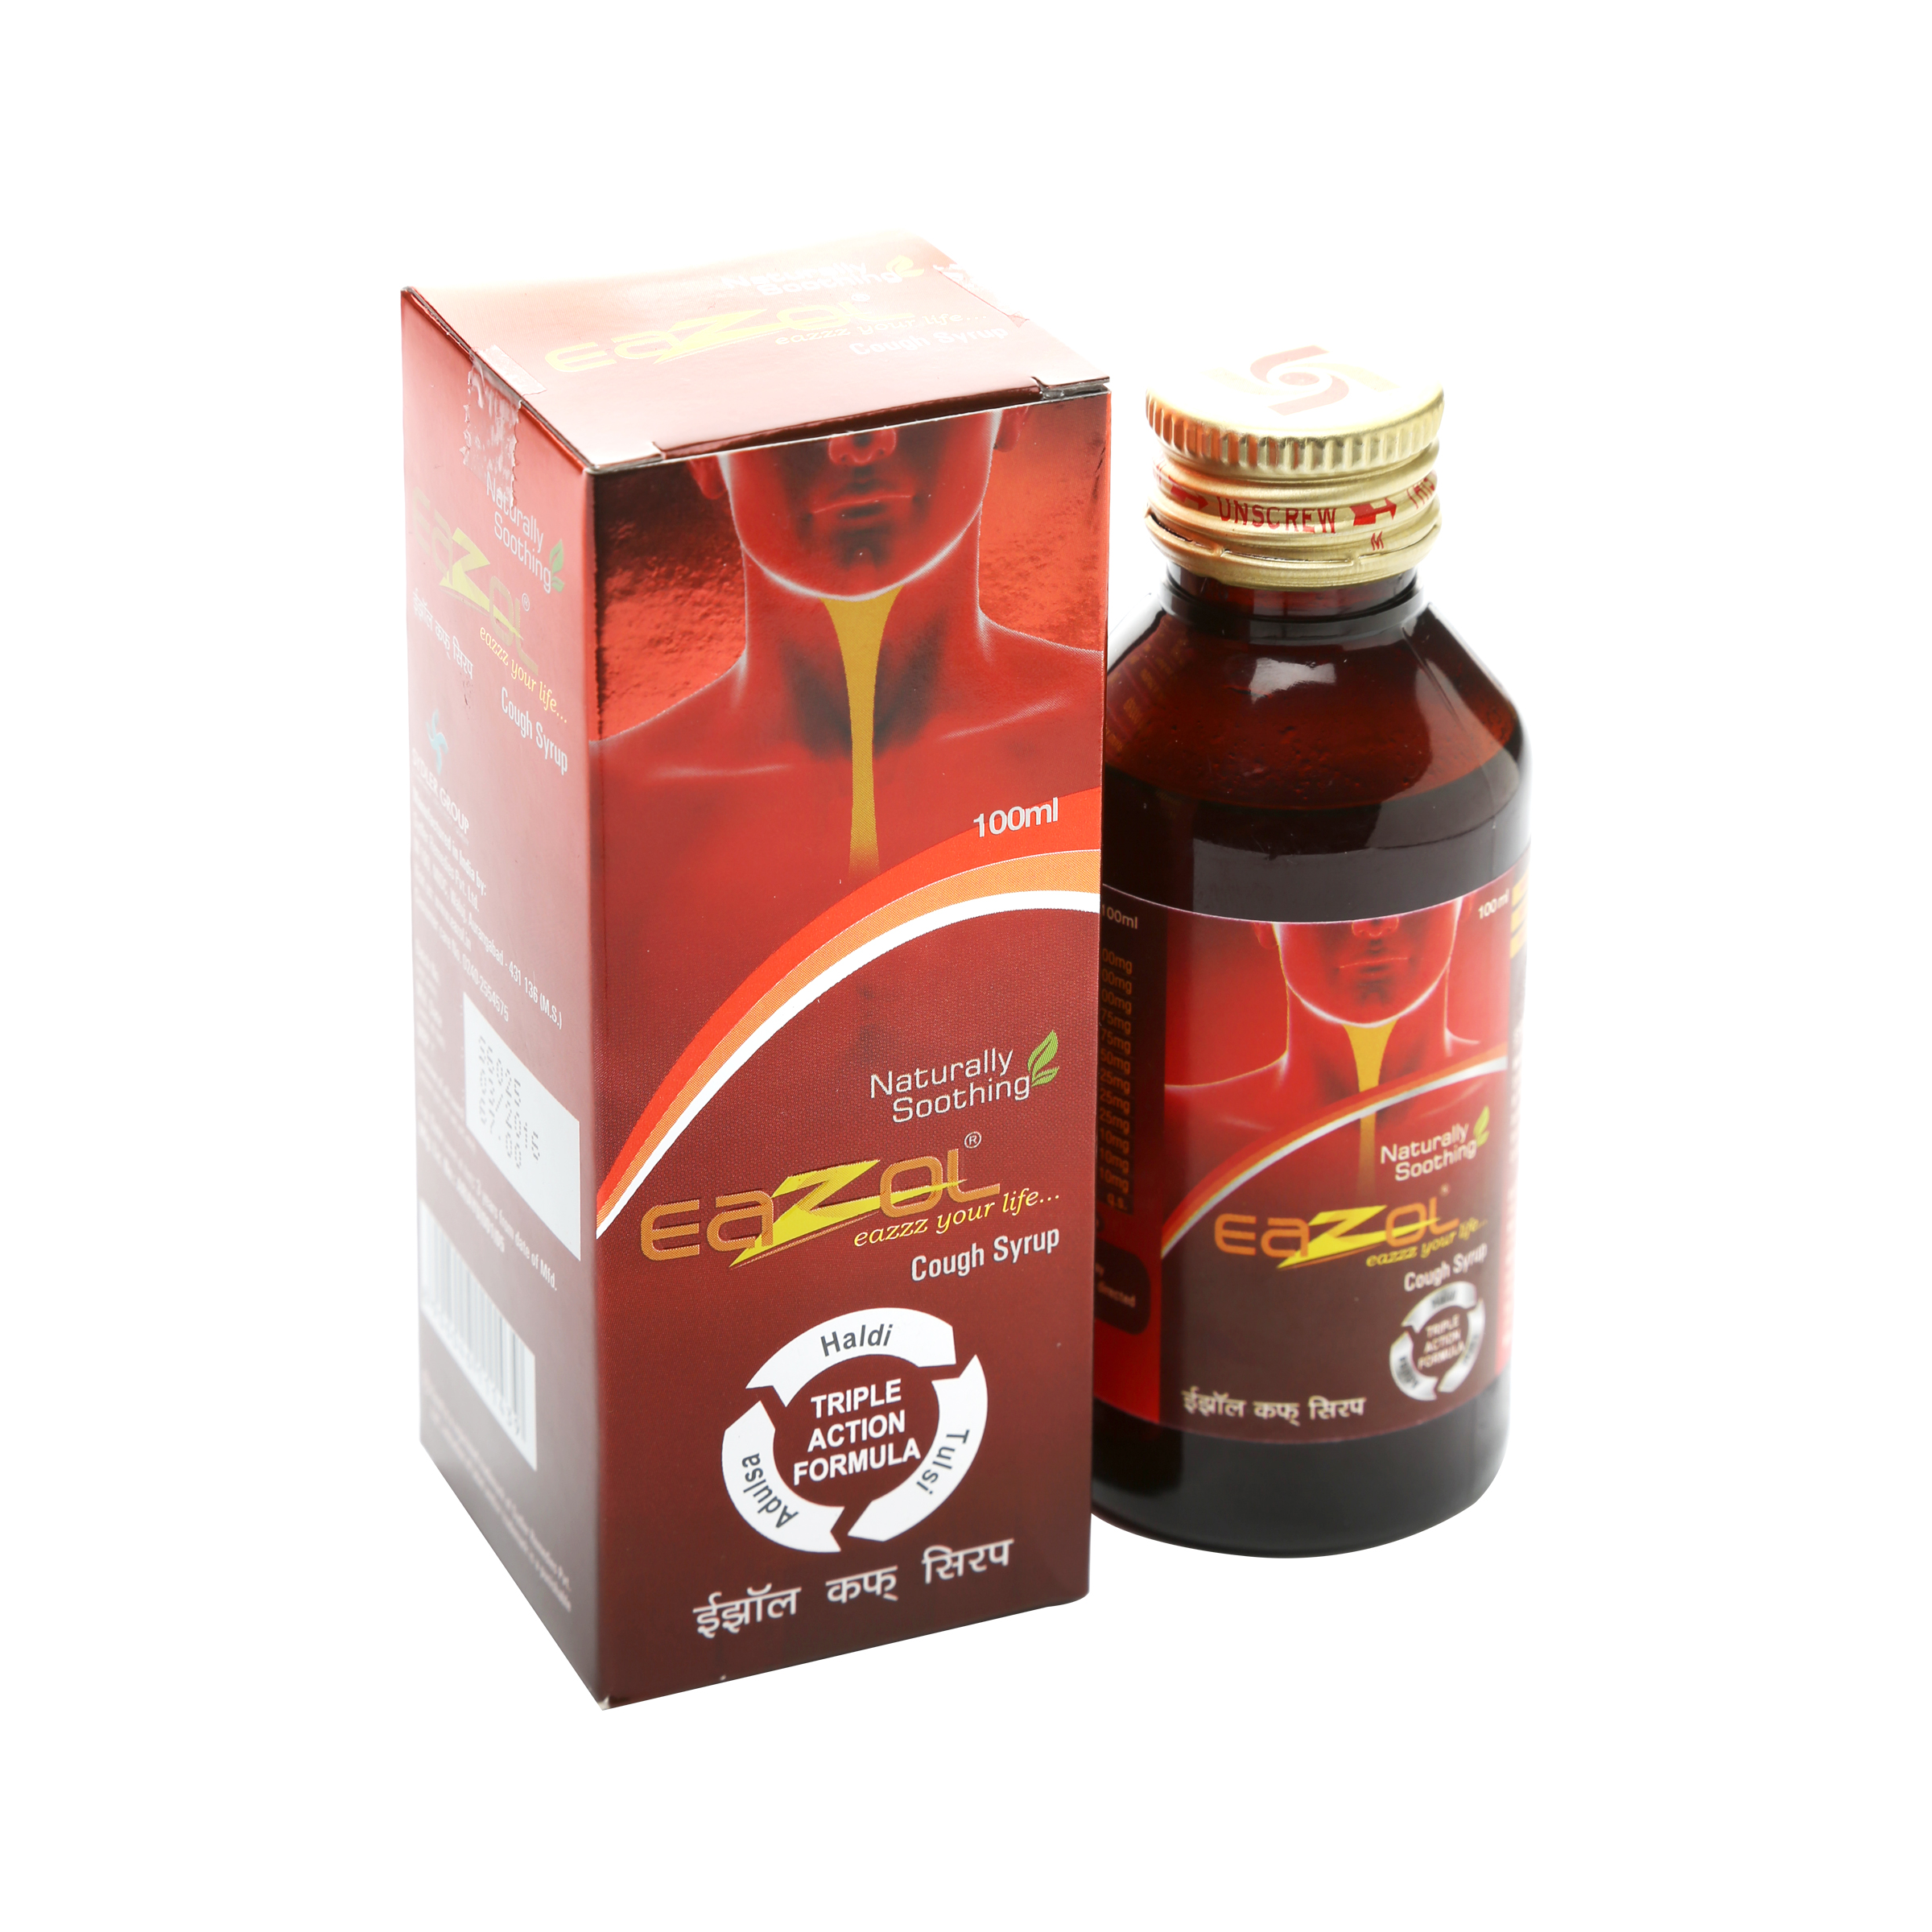 Eazol Cough Syrup